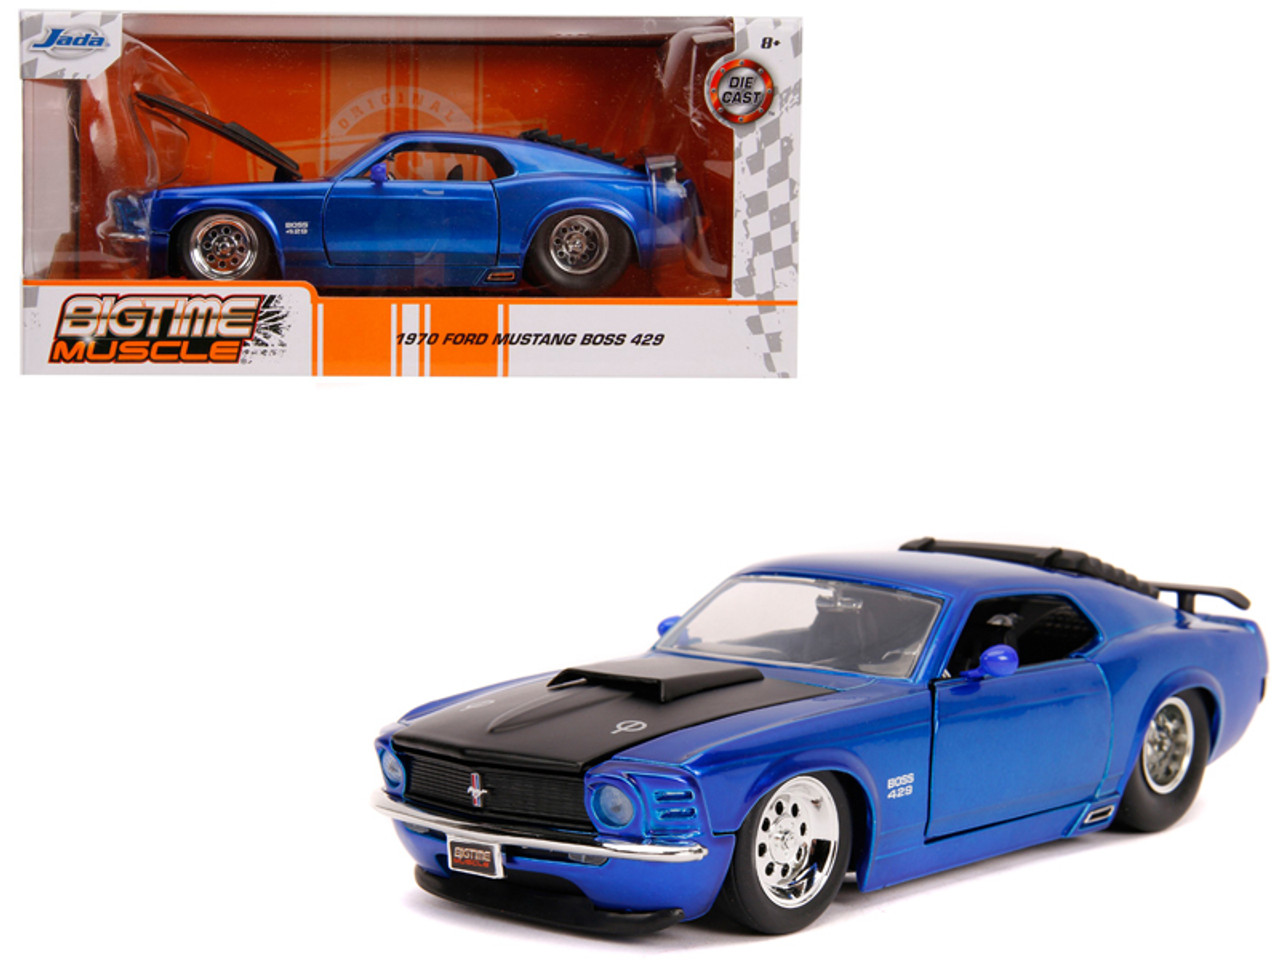 1970 Ford Mustang Boss 429 Candy Blue with Black Hood "Bigtime Muscle" 1/24 Diecast Model Car by Jada